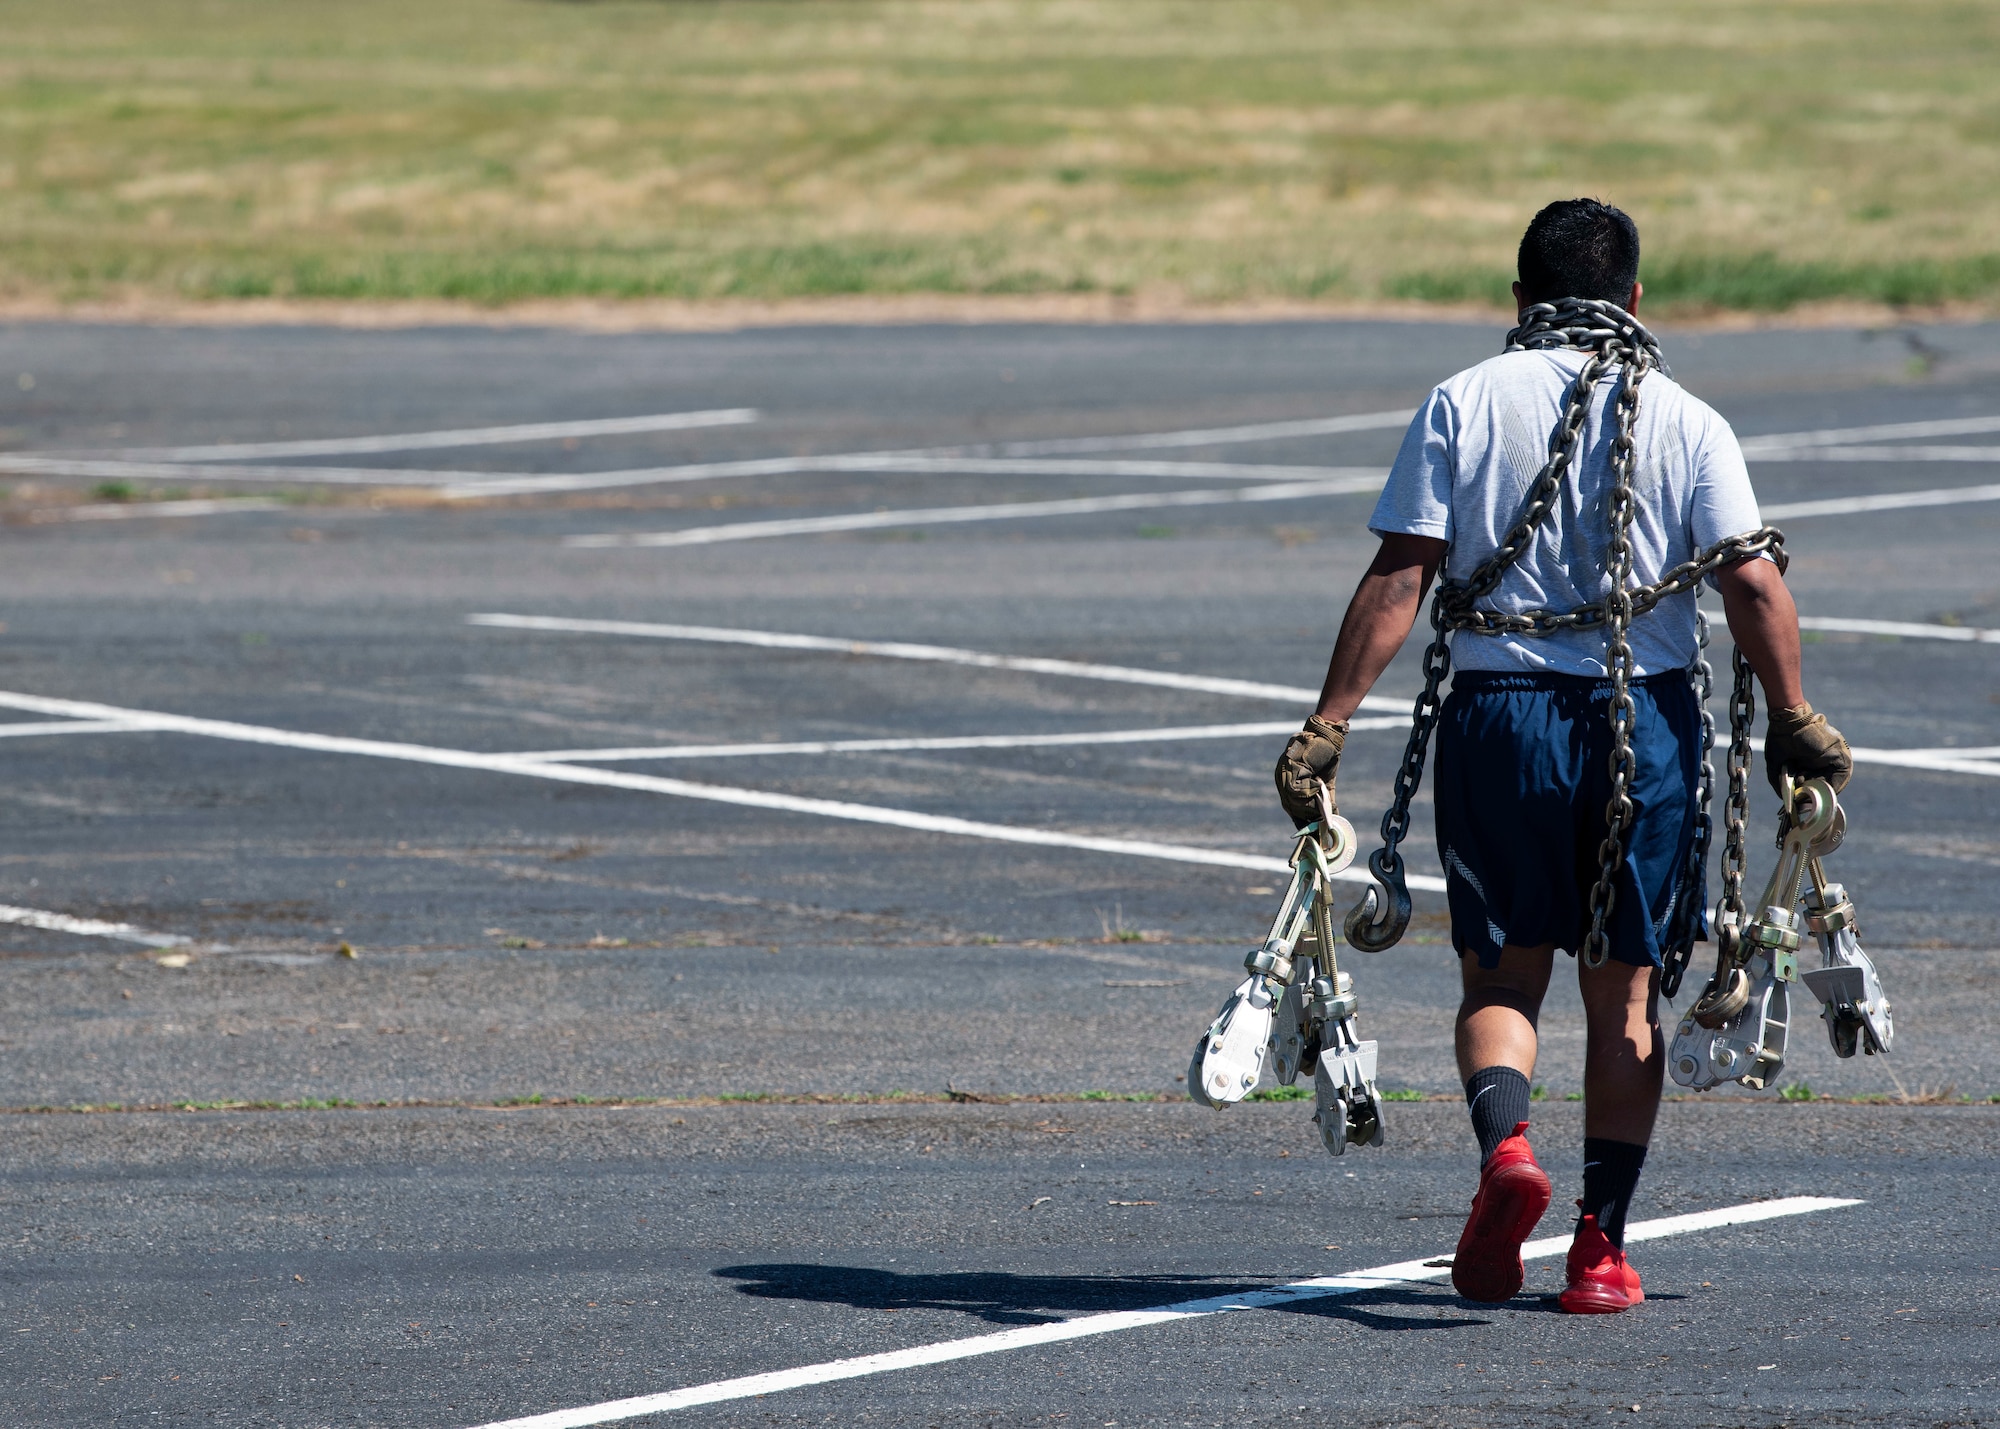 An Airman with the 62nd Aerial Port Squadron carries chains and other equipment across a course during a combat fitness challenge as part of the Eagle Port Rodeo Team tryouts at Joint Base Lewis-McChord, Washington, June 24, 2021. Once the team is chosen, they will travel to Joint Base Pearl Harbor-Hickam, Hawaii, to showcase their skills and build camaraderie with Port Dawgs from other wings. (U.S. Air Force photo by Senior Airman Zoe Thacker)